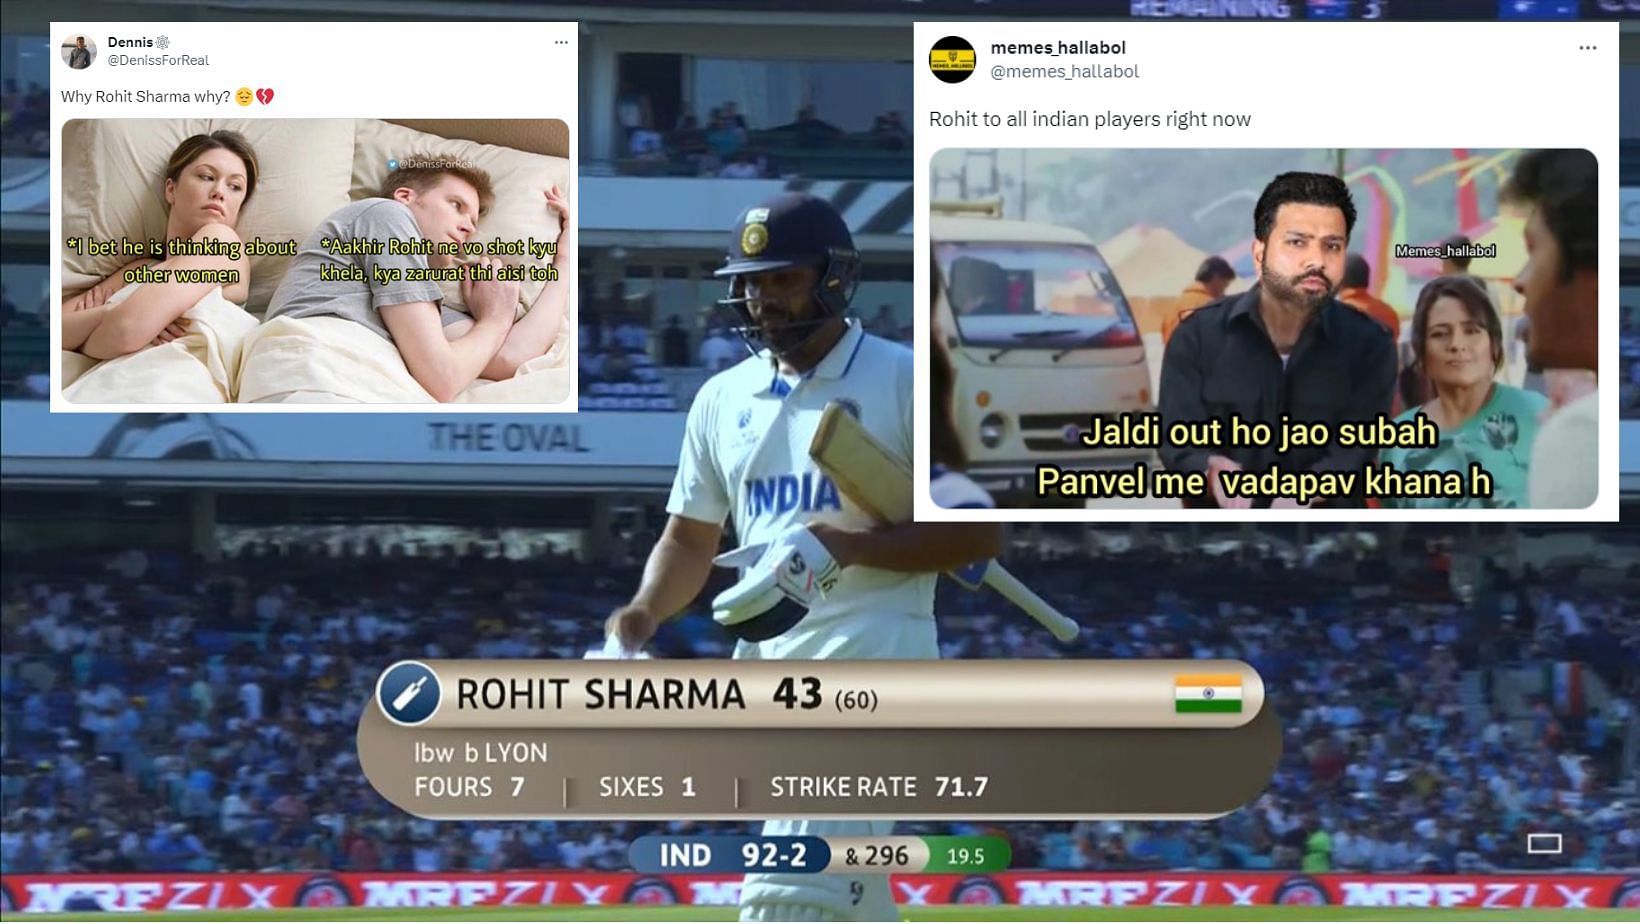 Twitter reactions to Rohit Sharma